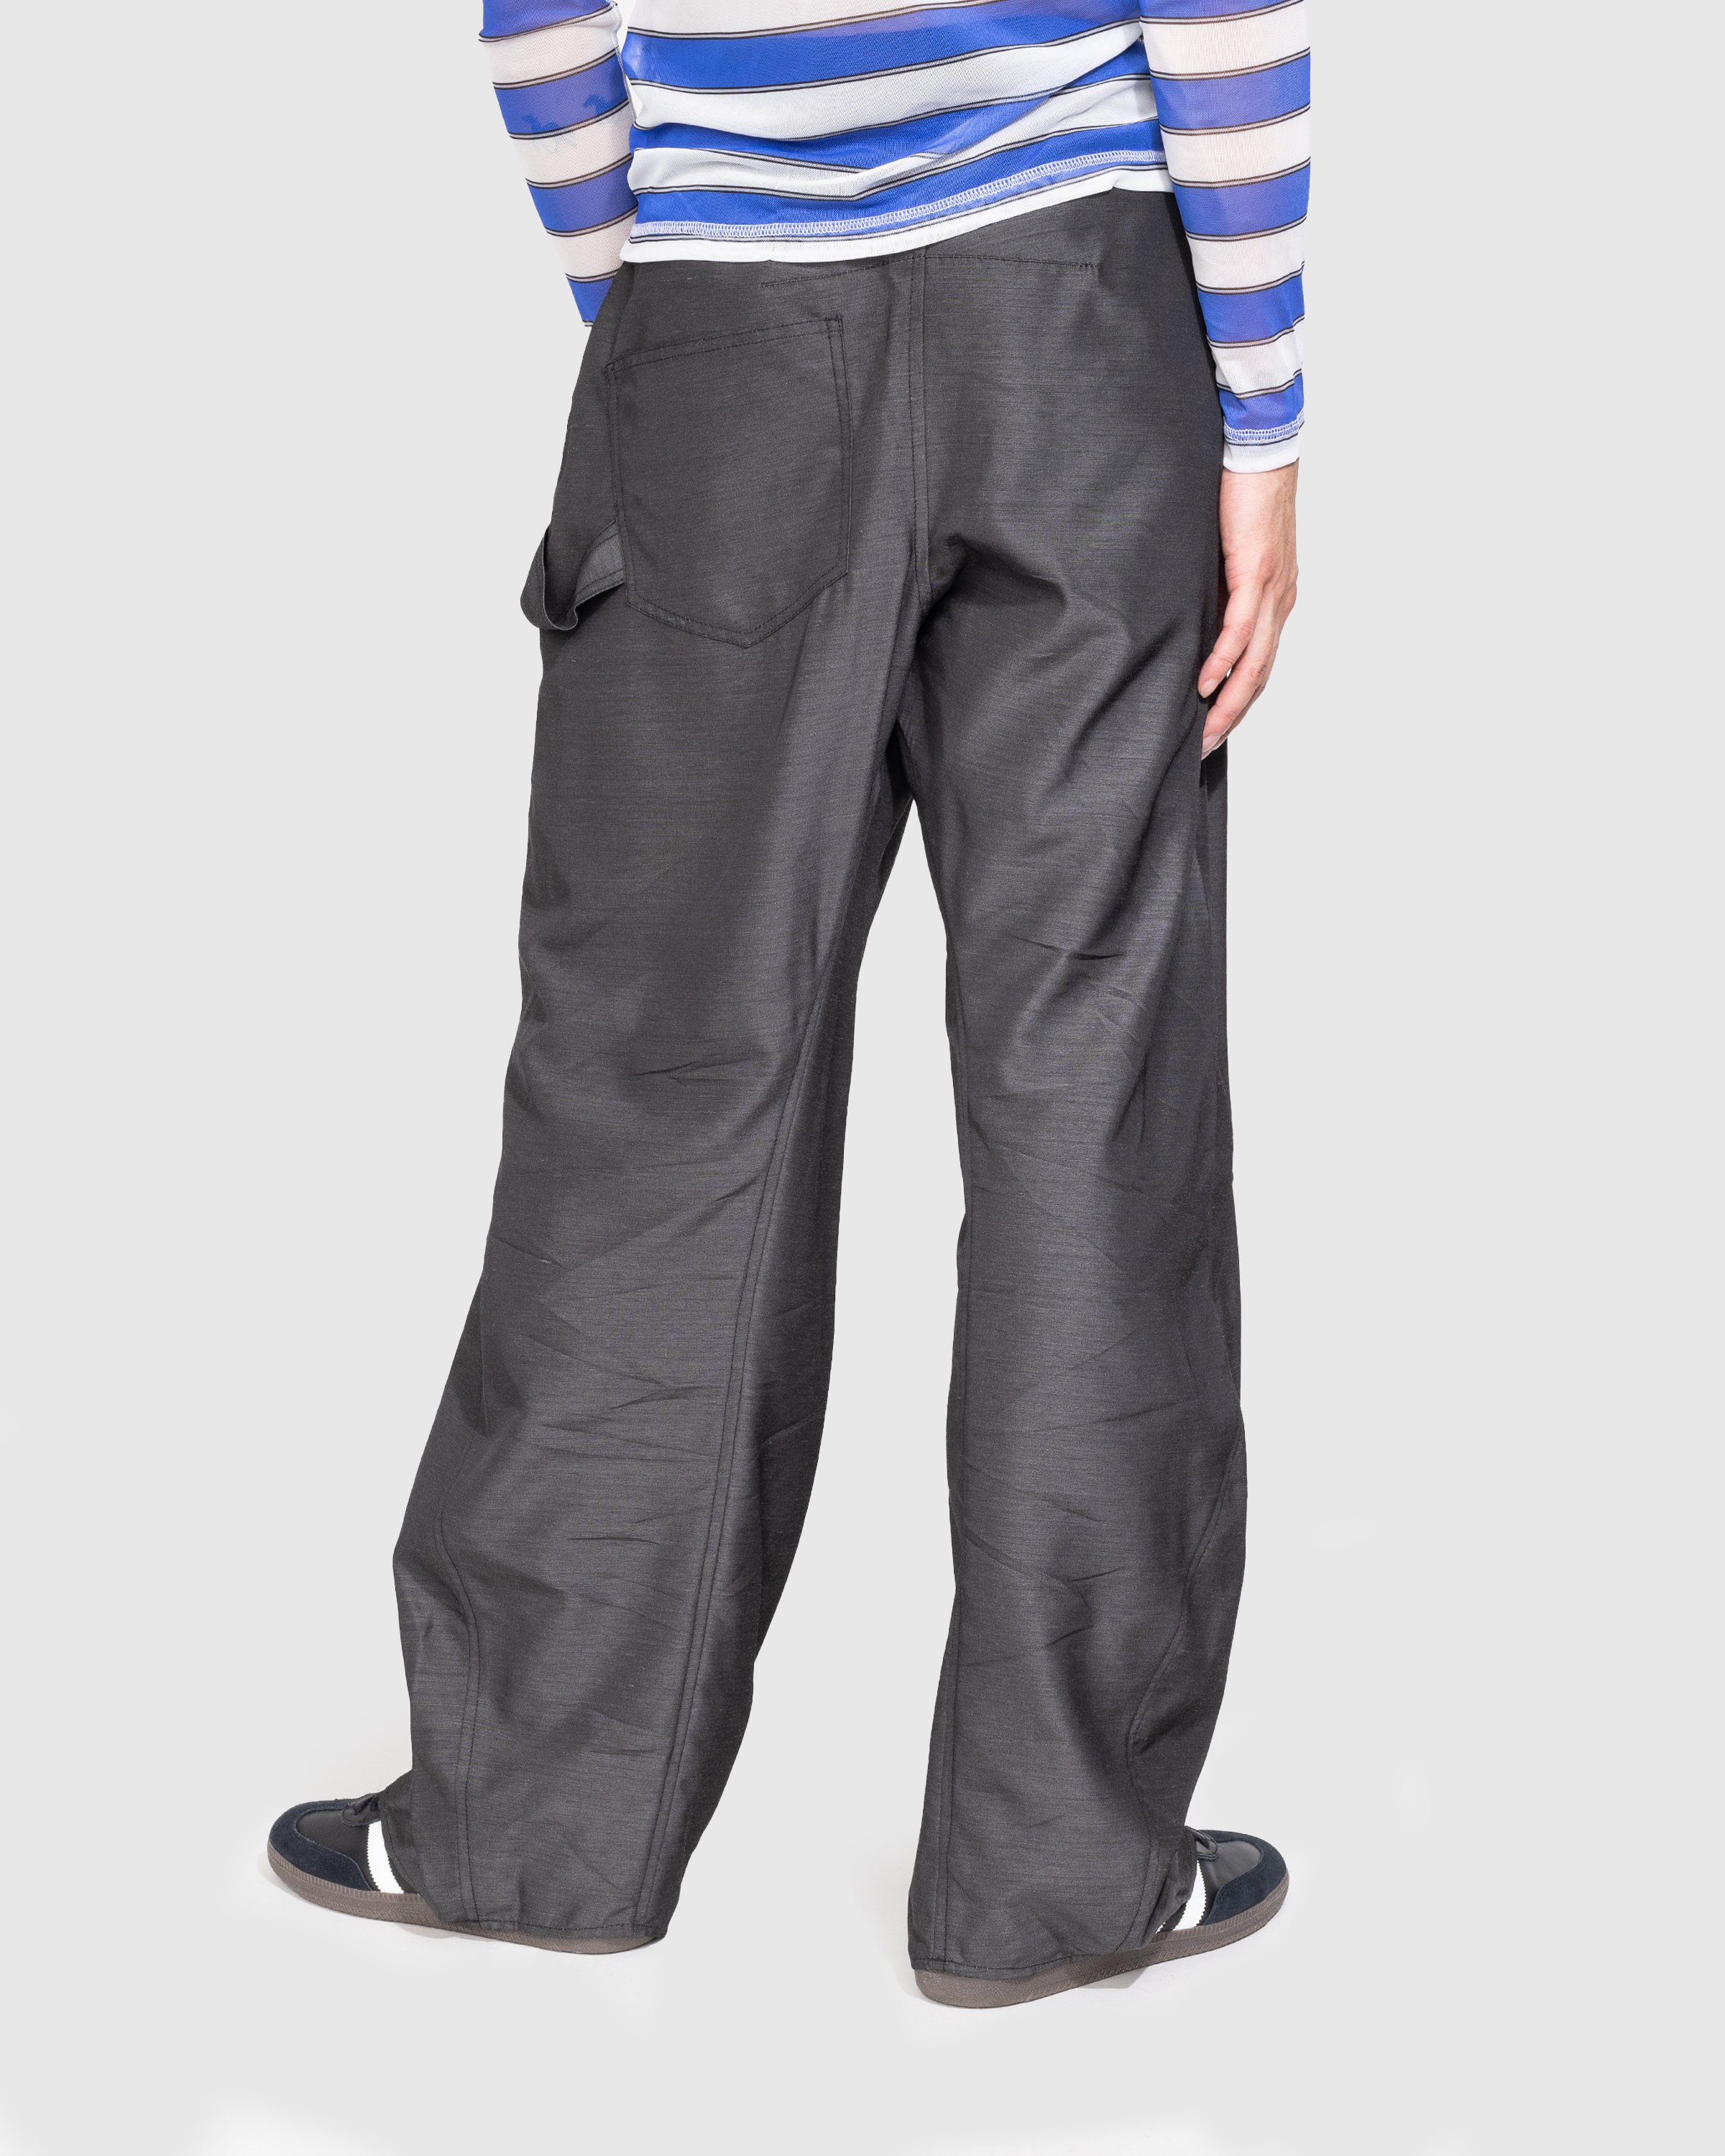 J.W. Anderson - Twisted Workwear Trousers Grey - Clothing - Grey - Image 3